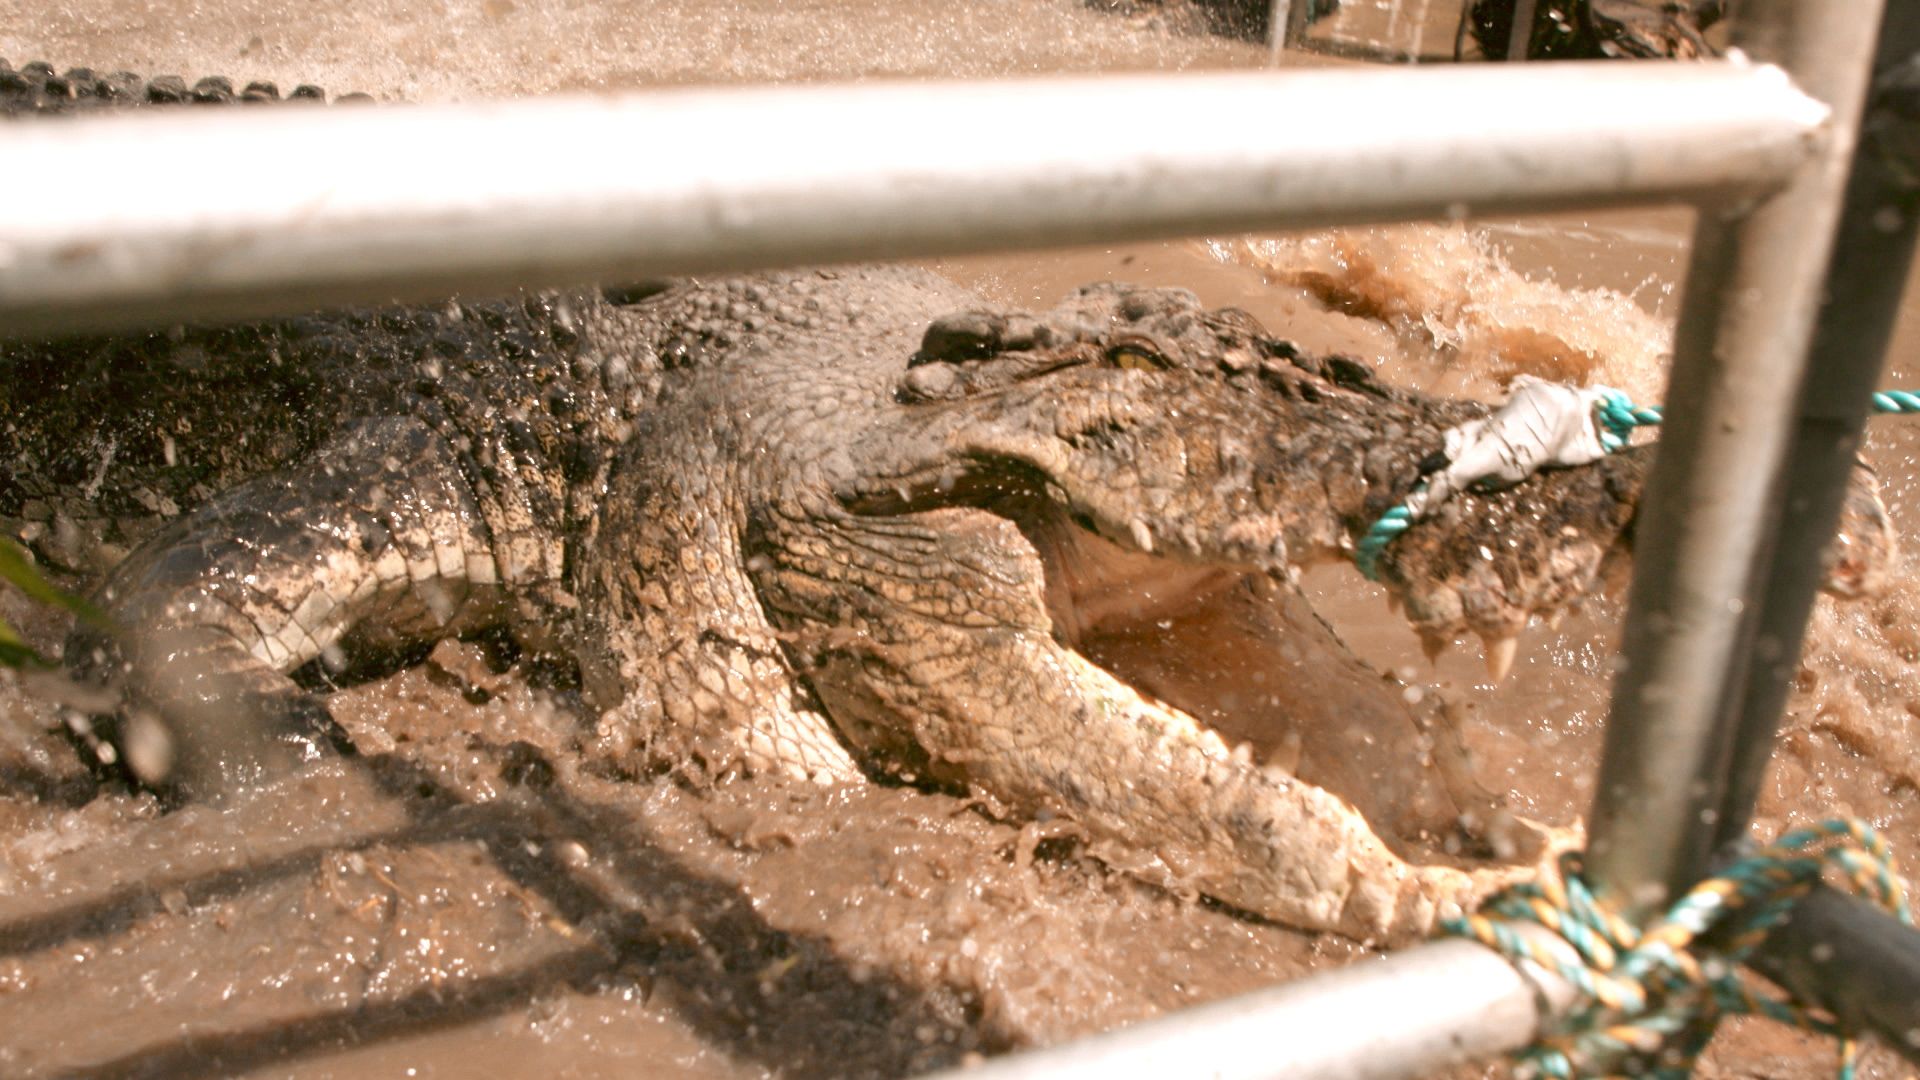 Close up action shot of crocodile being pulled out of panel trap. [Photo of the day - October 2021]